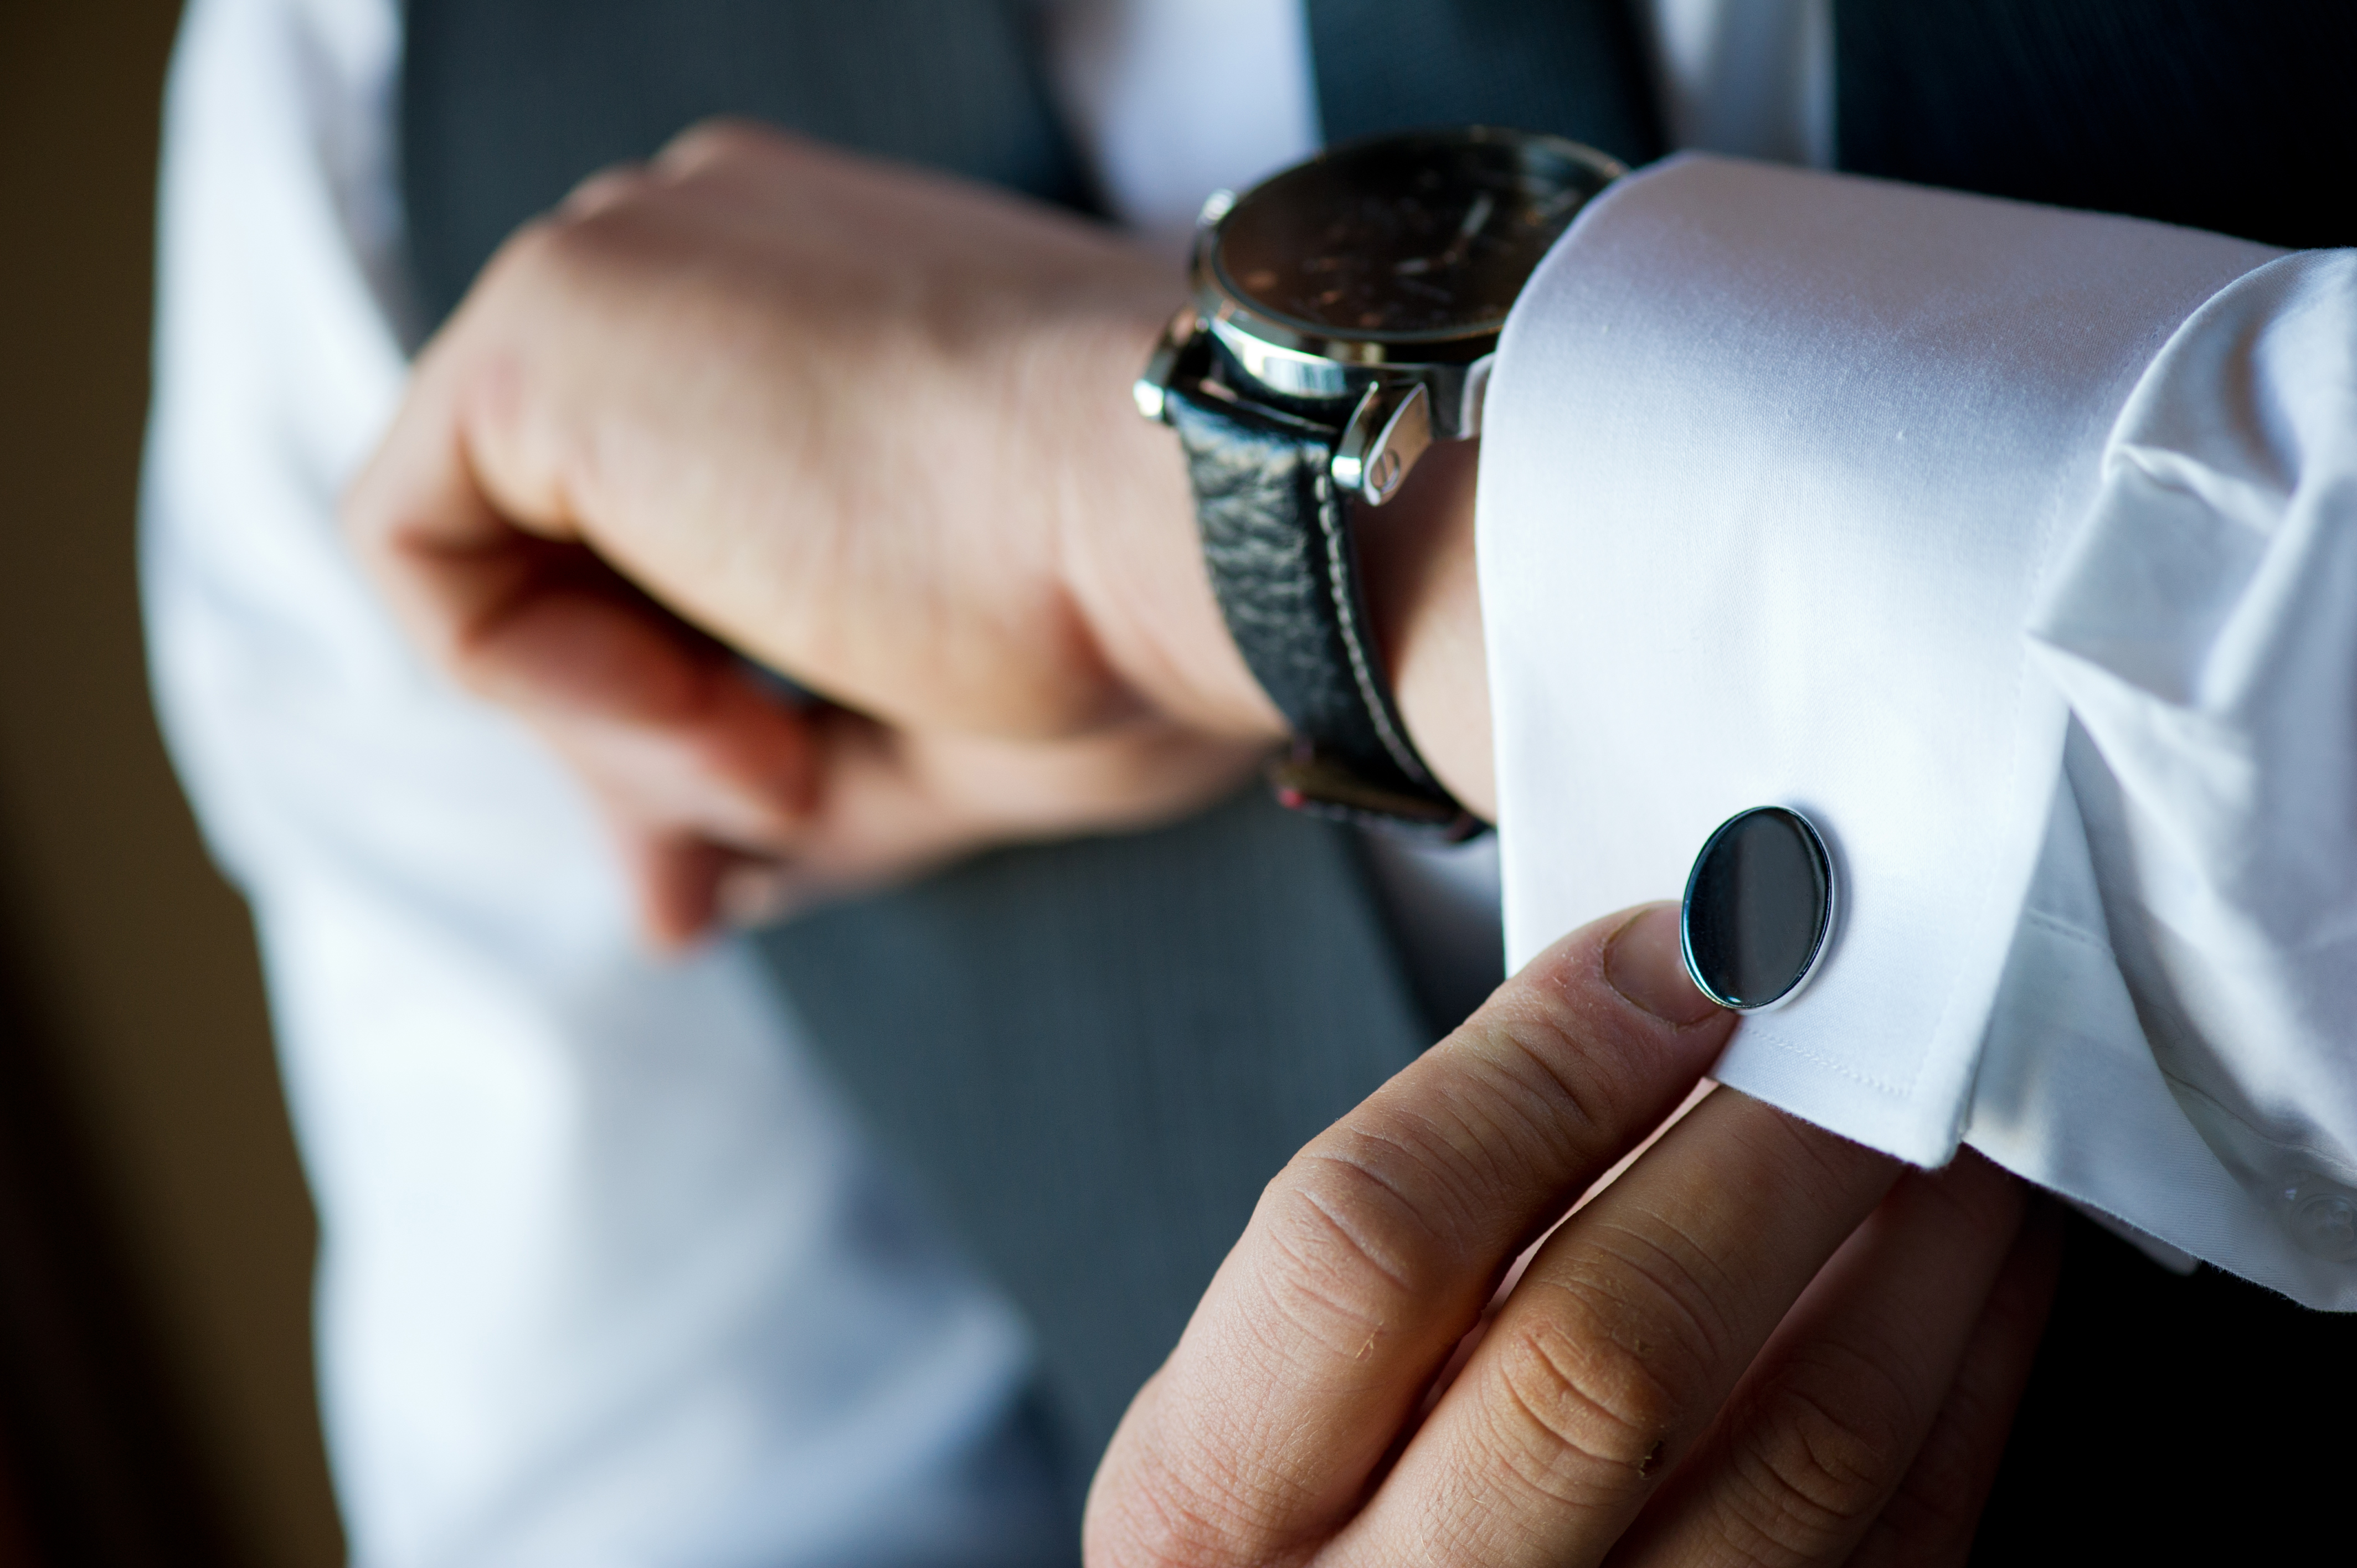 A white suit sleeve with a button to the right of the model's watch